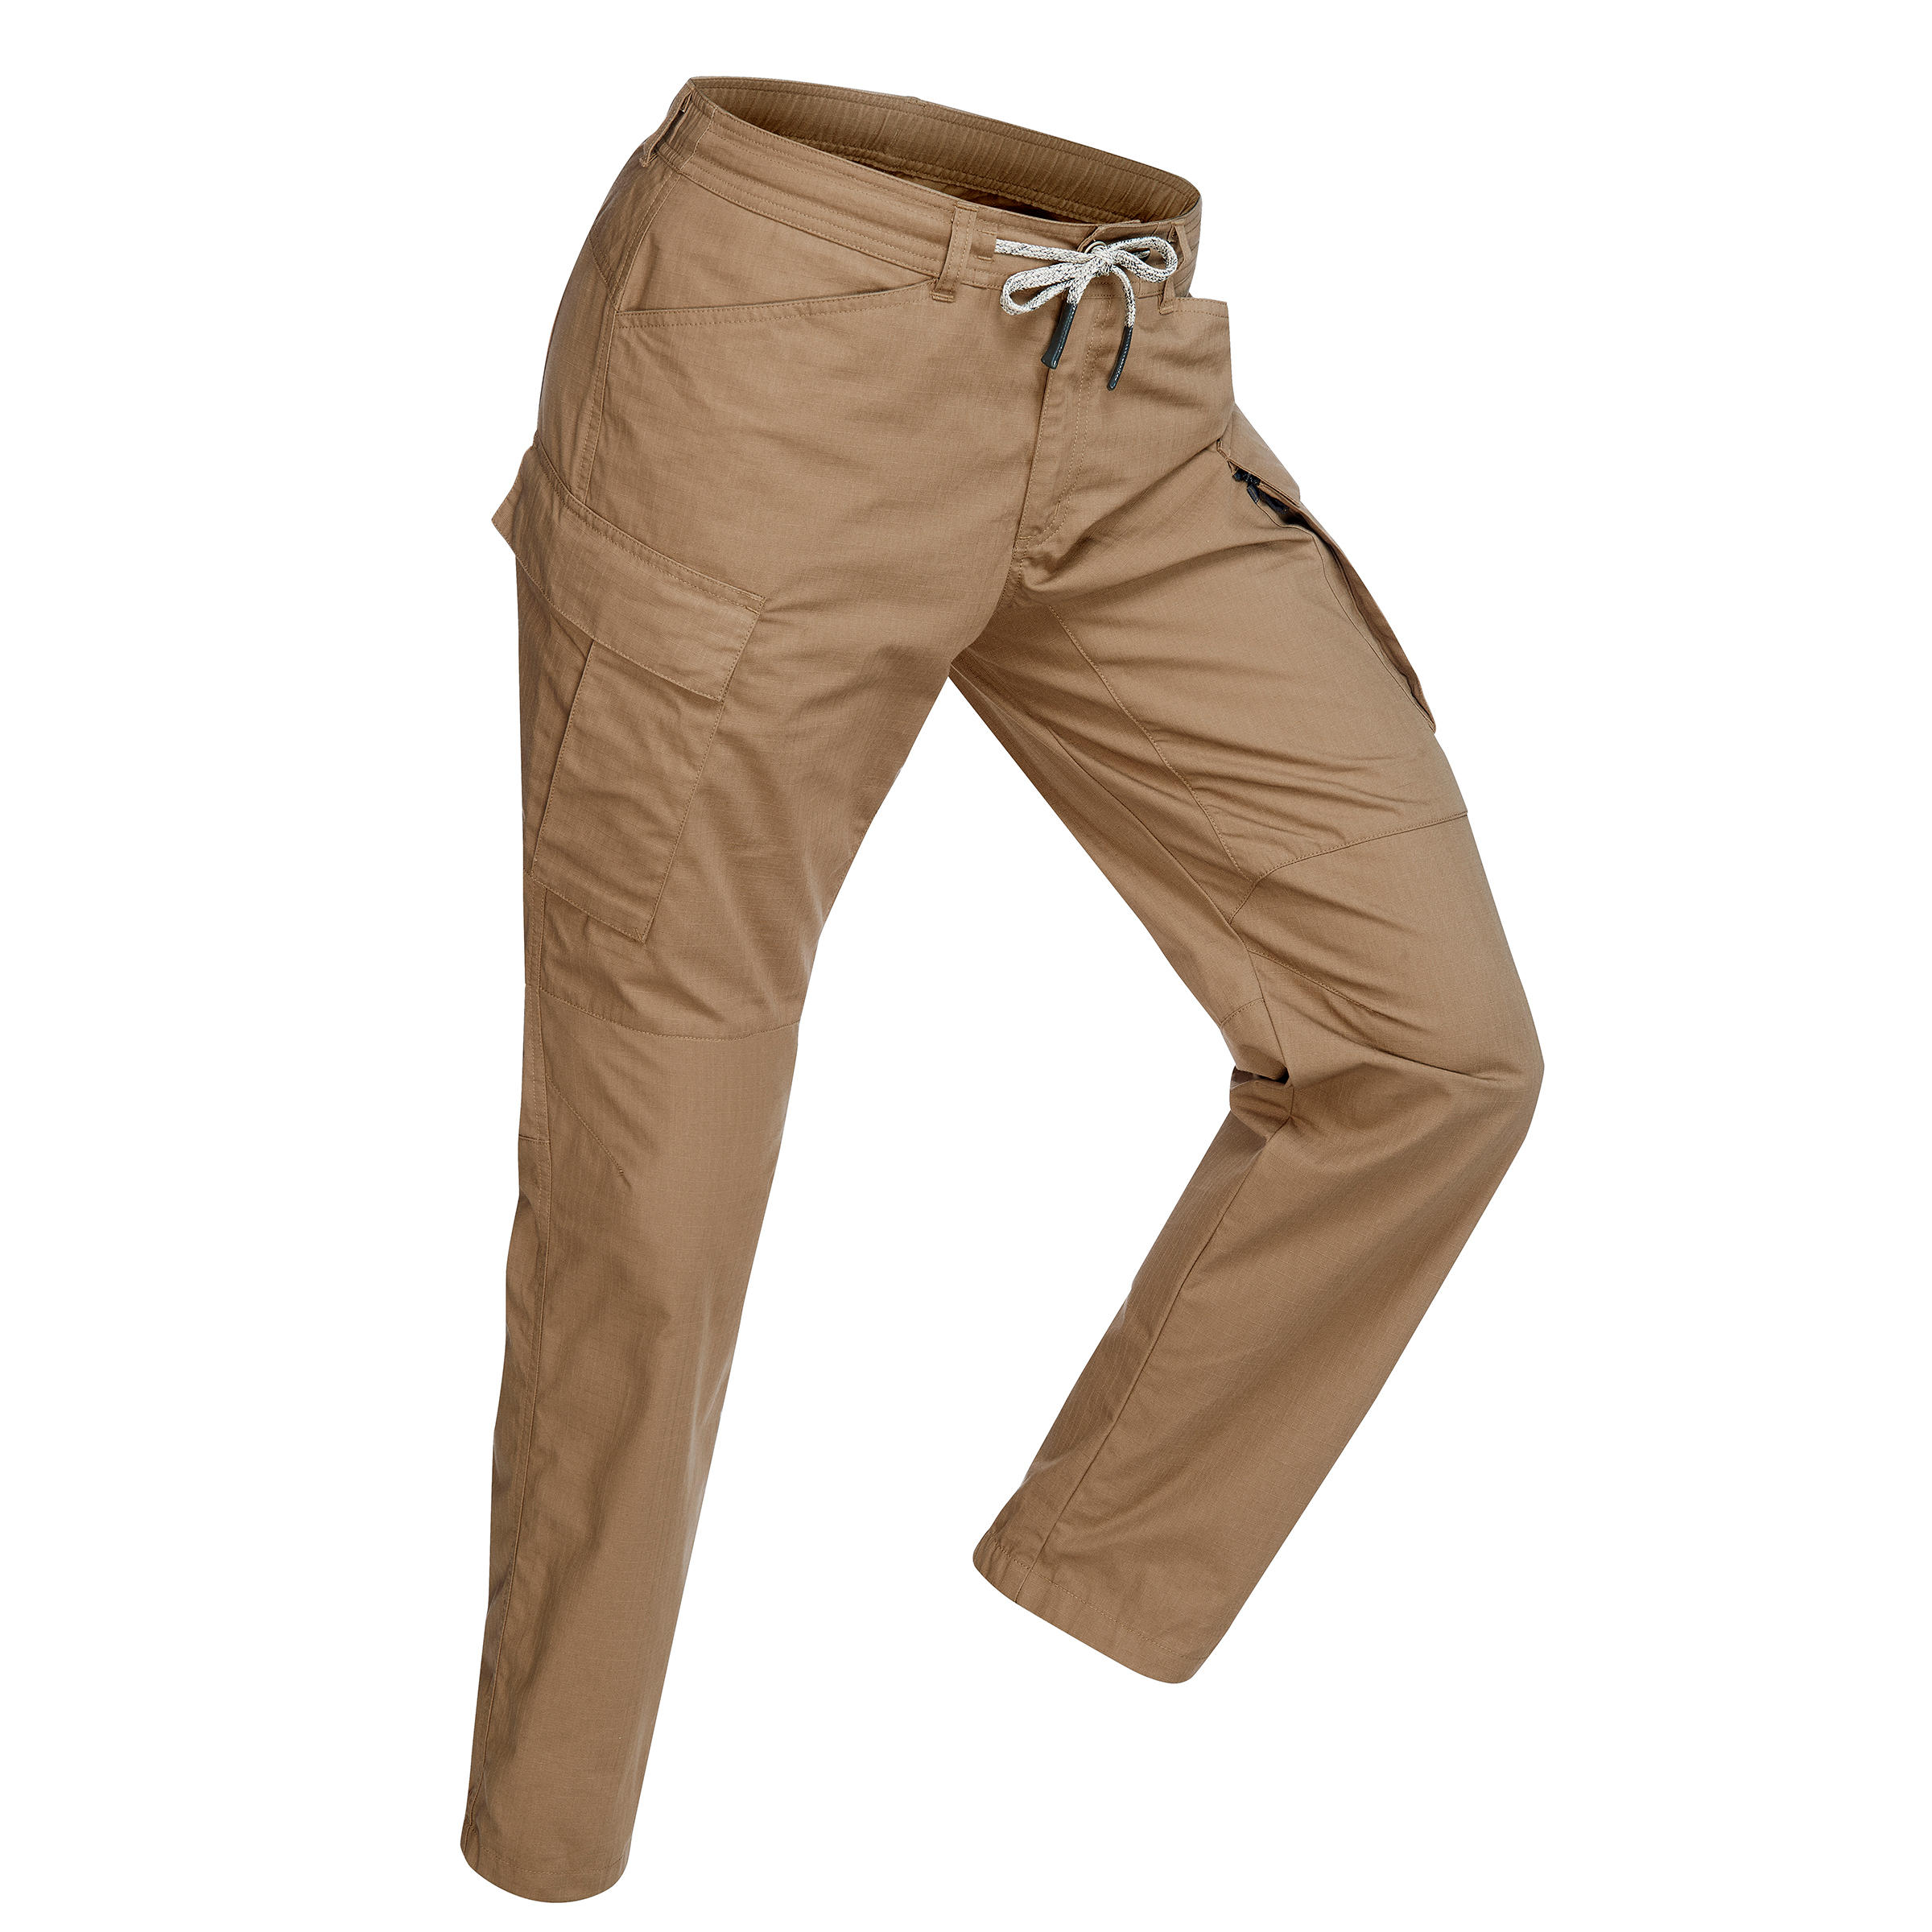 Men S Soften Washing Double Cargo Patched Pocket Trousers  Pants  China  Elastic Waistband Pants and Slim Pants price  MadeinChinacom